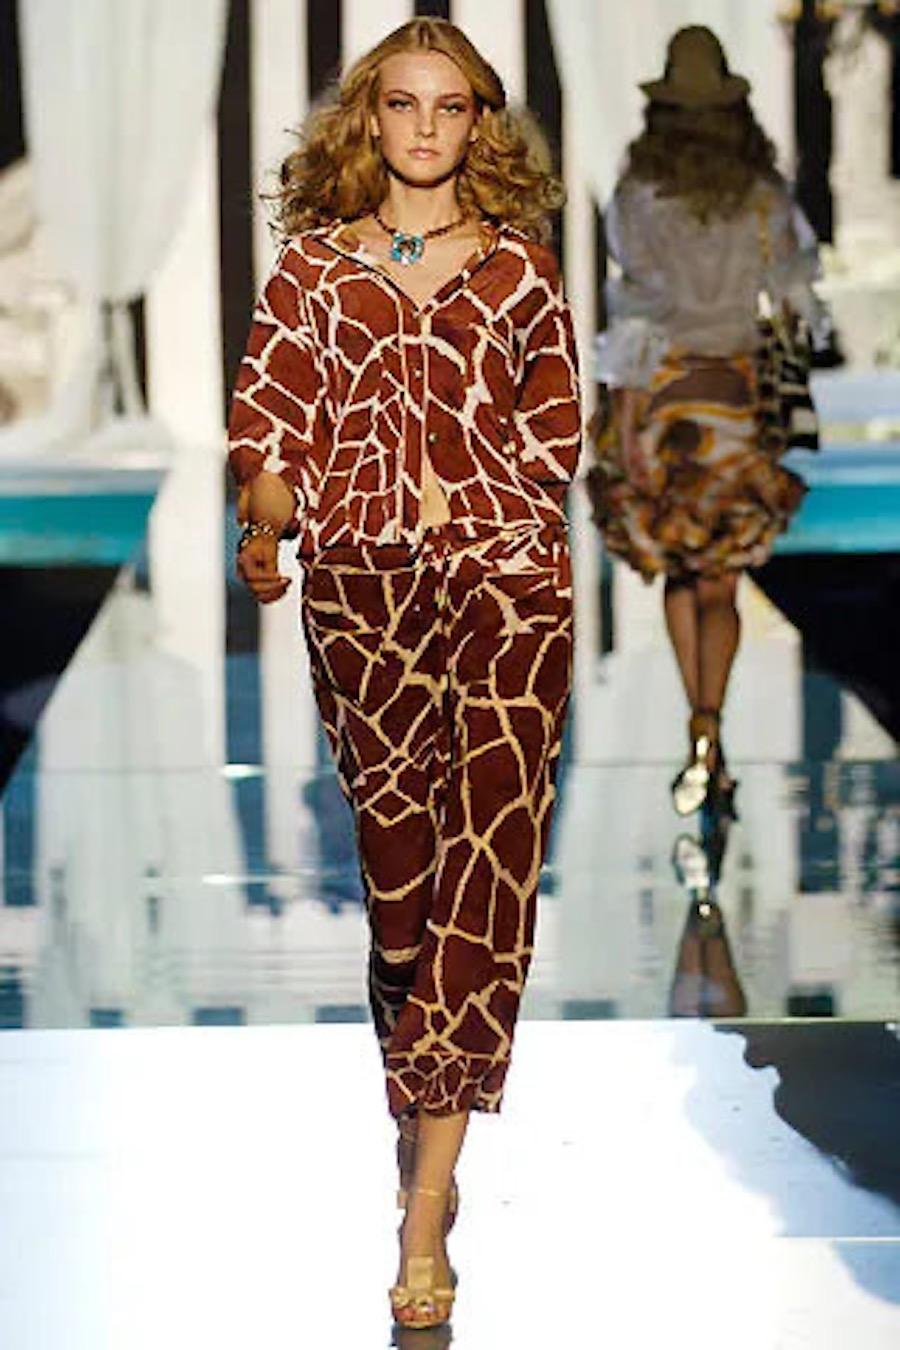 Roberto Cavalli S/S 2006 Giraffe Print Silk Gown with 3D Floral Appliqués For Sale 9